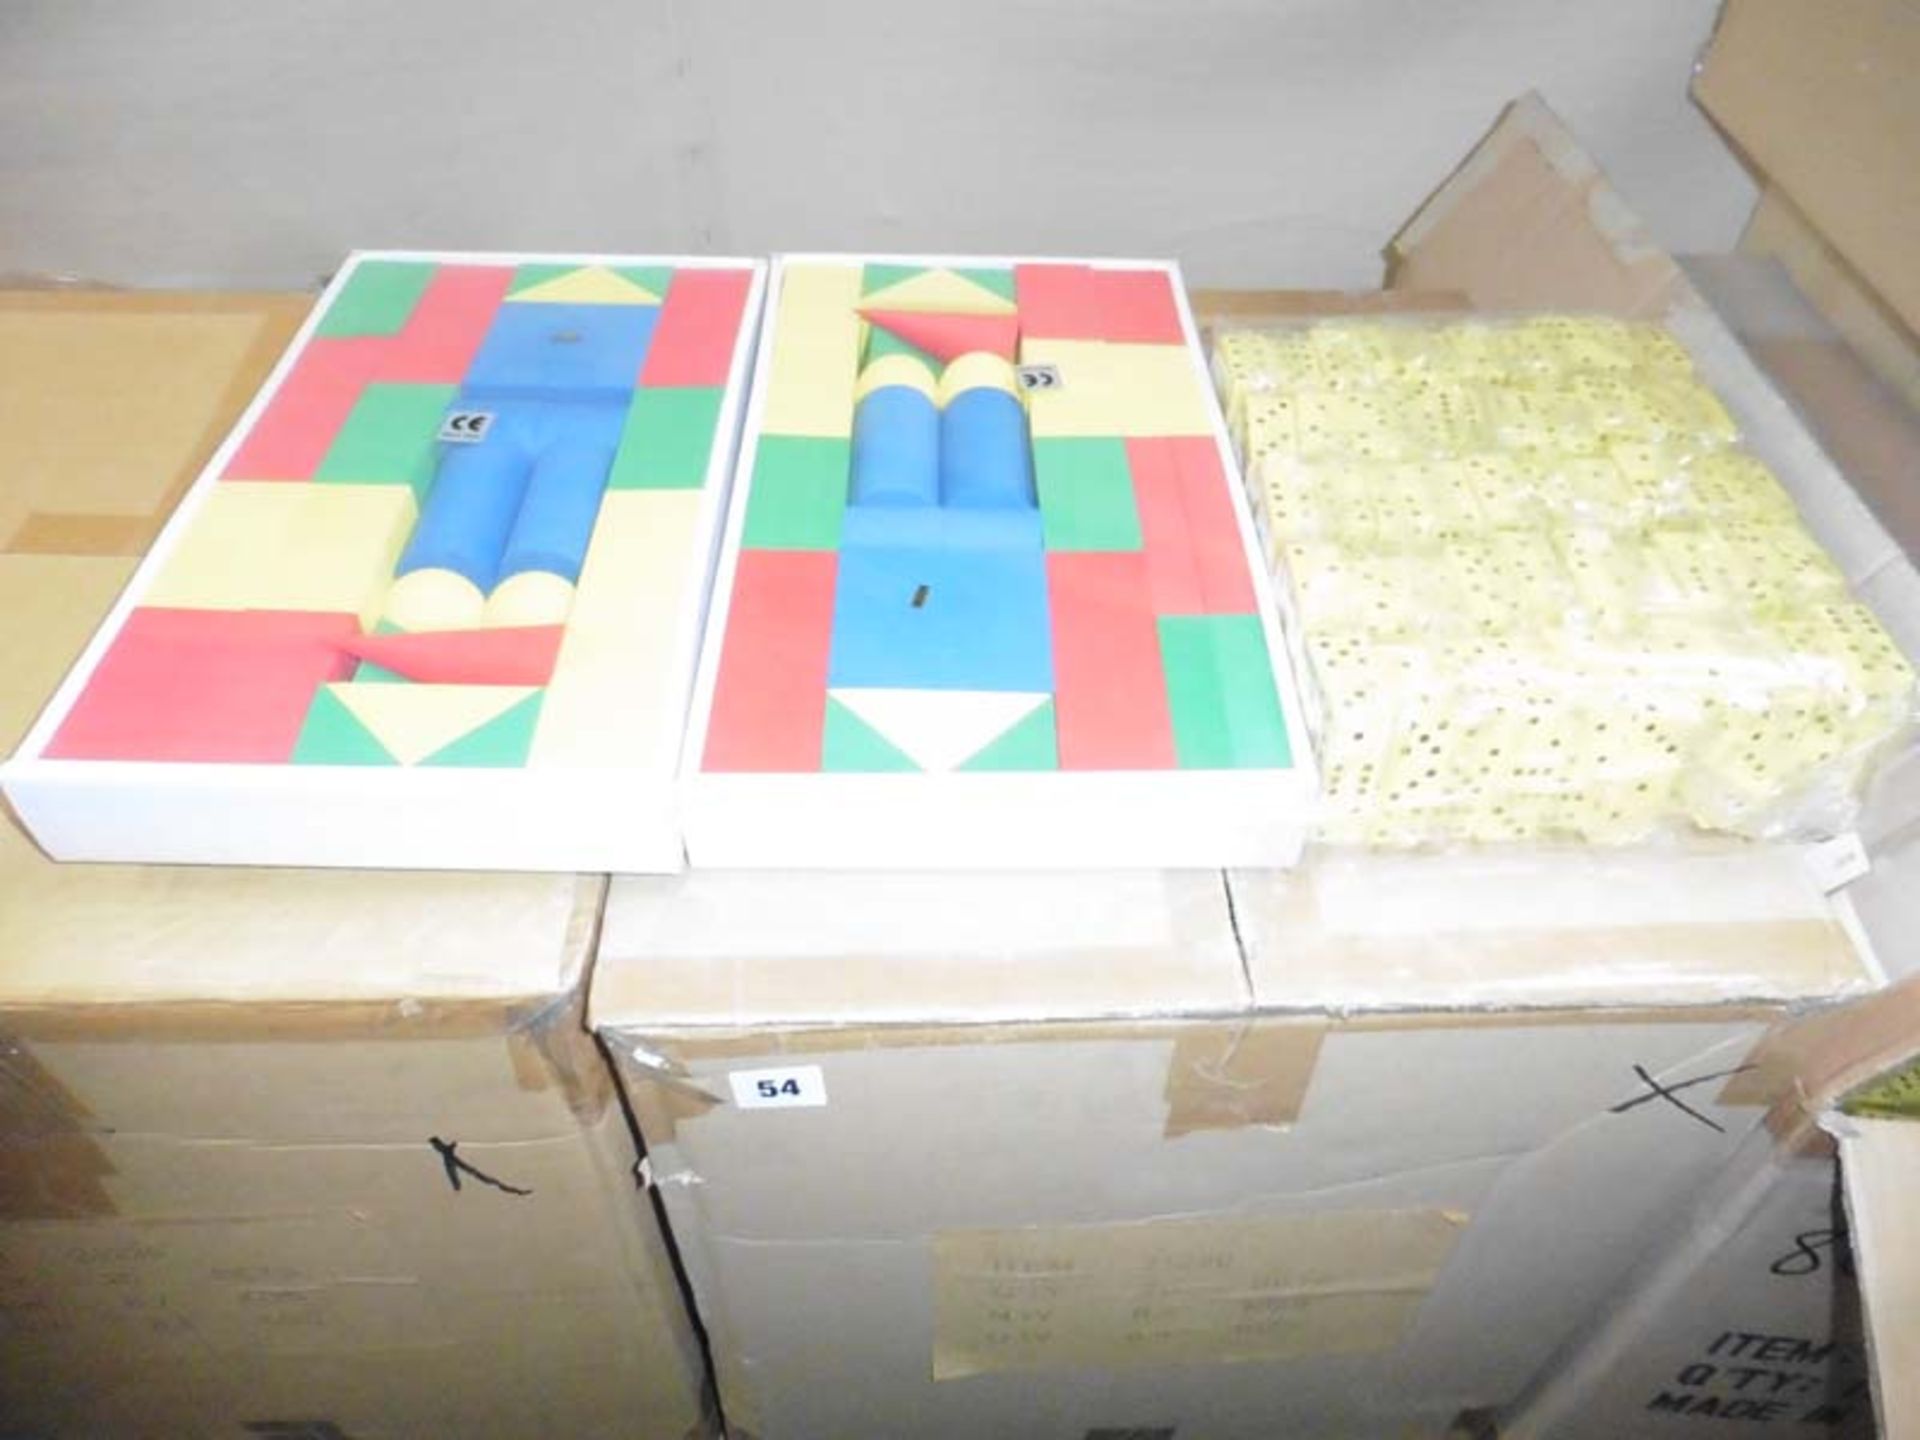 Pallet of foam shapes and dice approx 1500 dice and 50 sets of shapes